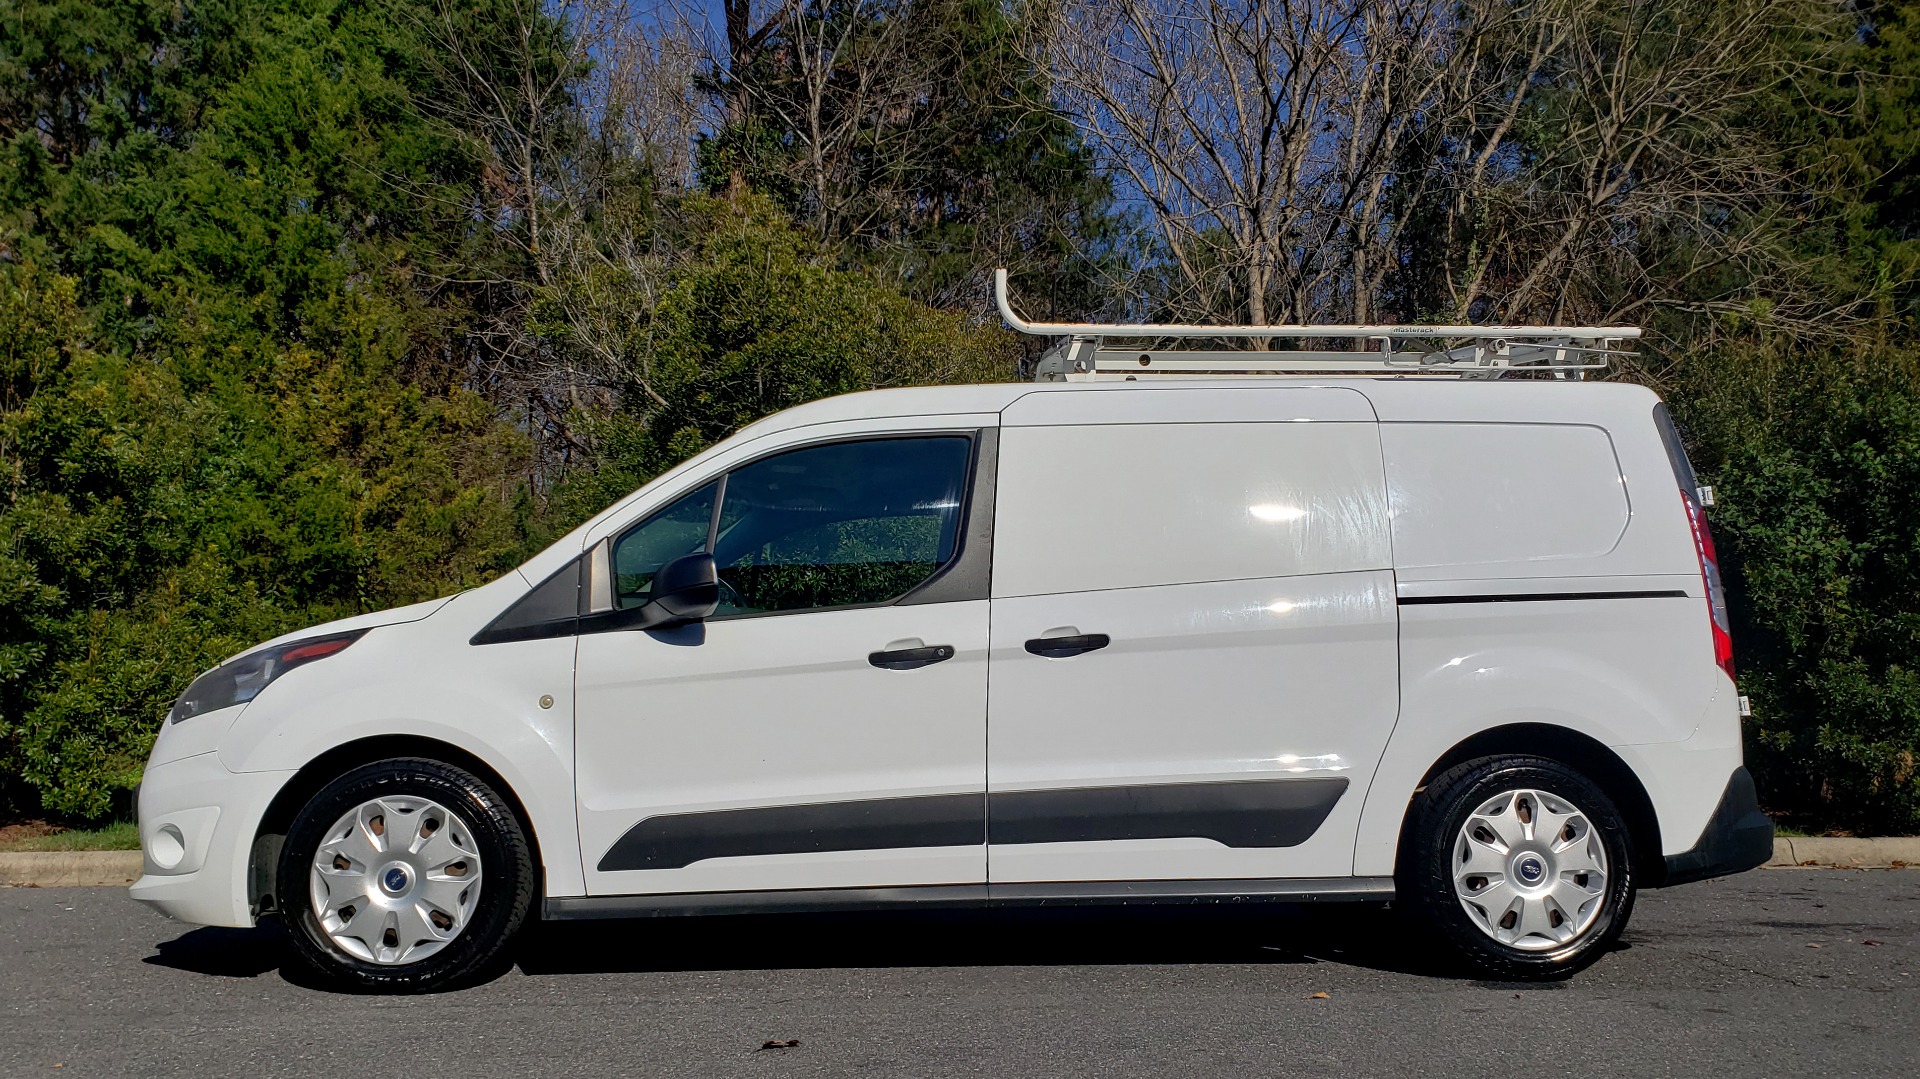 Used 2015 Ford TRANSIT CONNECT XLT CARGO VAN / 121-IN WB / 2.5L 4-CYL / AUTO / REARVIEW / WORK VAN for sale Sold at Formula Imports in Charlotte NC 28227 2